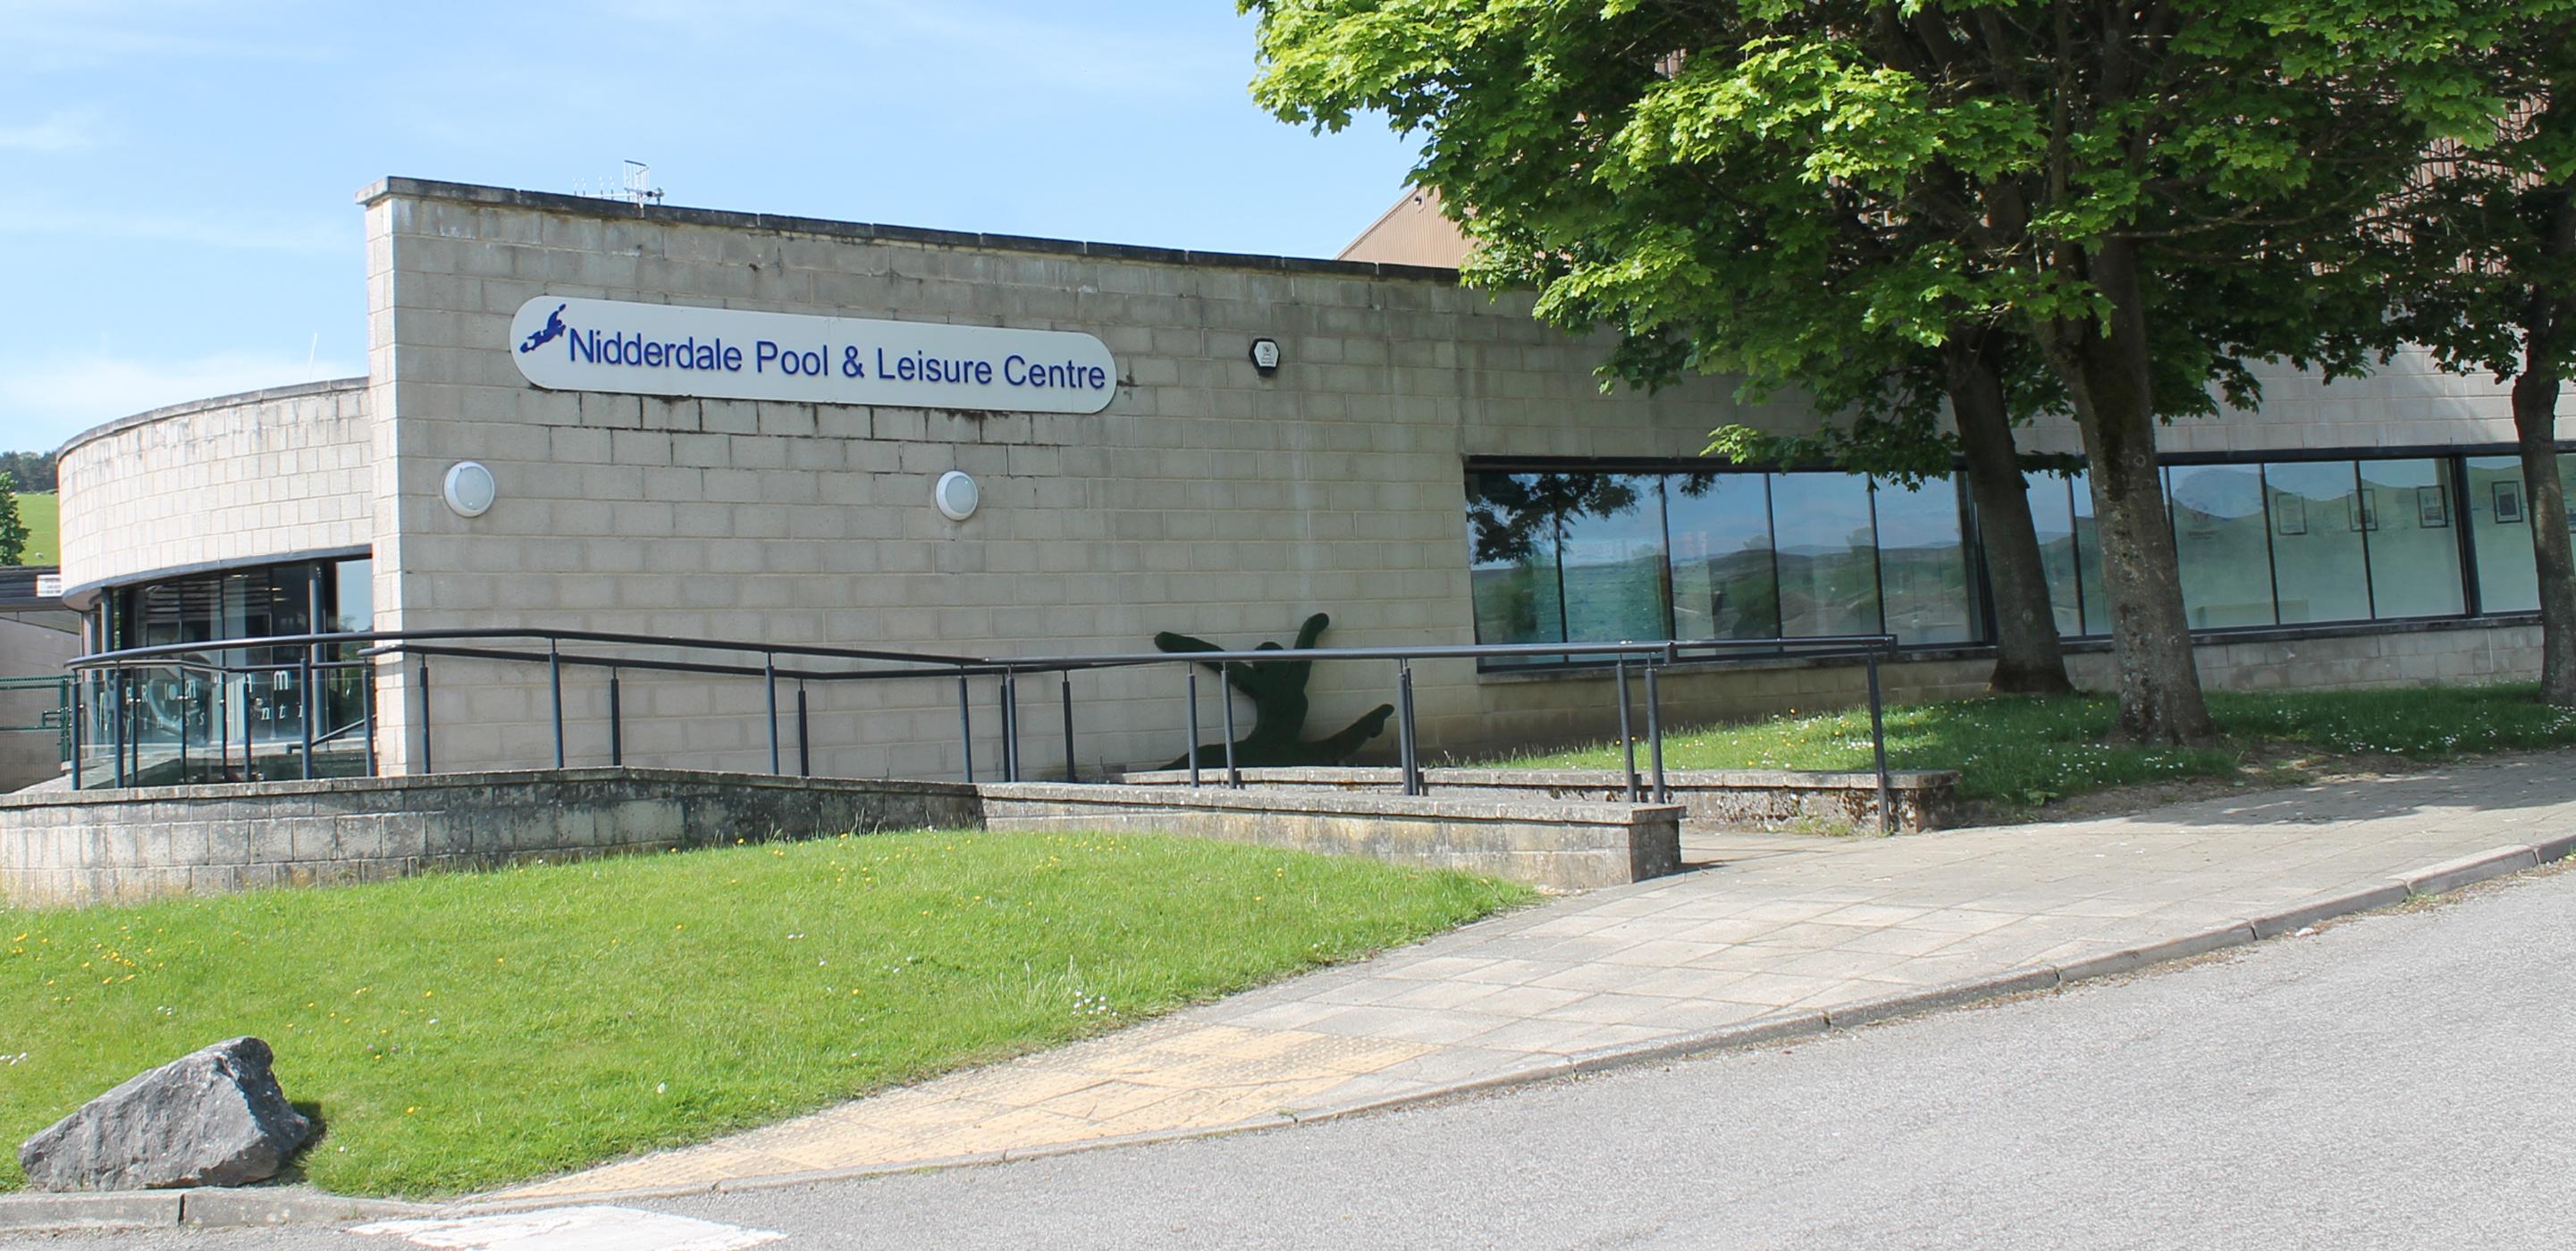 Nidderdale Pool and Leisure Centre